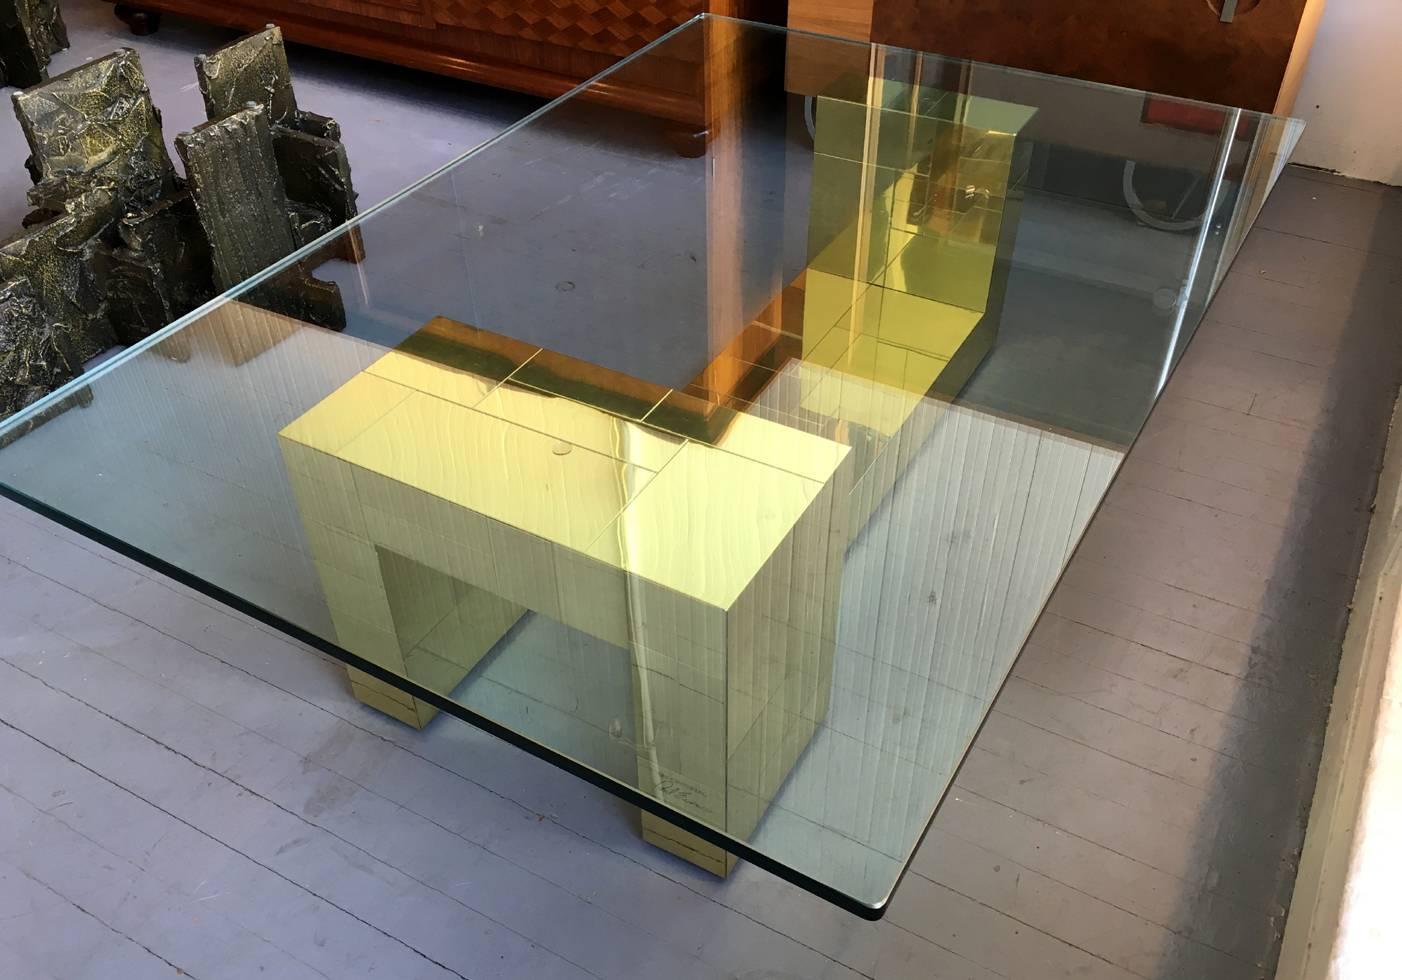 Signature cityscape series coffee table by Paul Evans. Two asymmetrical brass and plated bases support a thick glass top. Signed as original Paul Evans. The two bases currently support a 0.5 inch thick glass top that measures 56 by 38 but can be